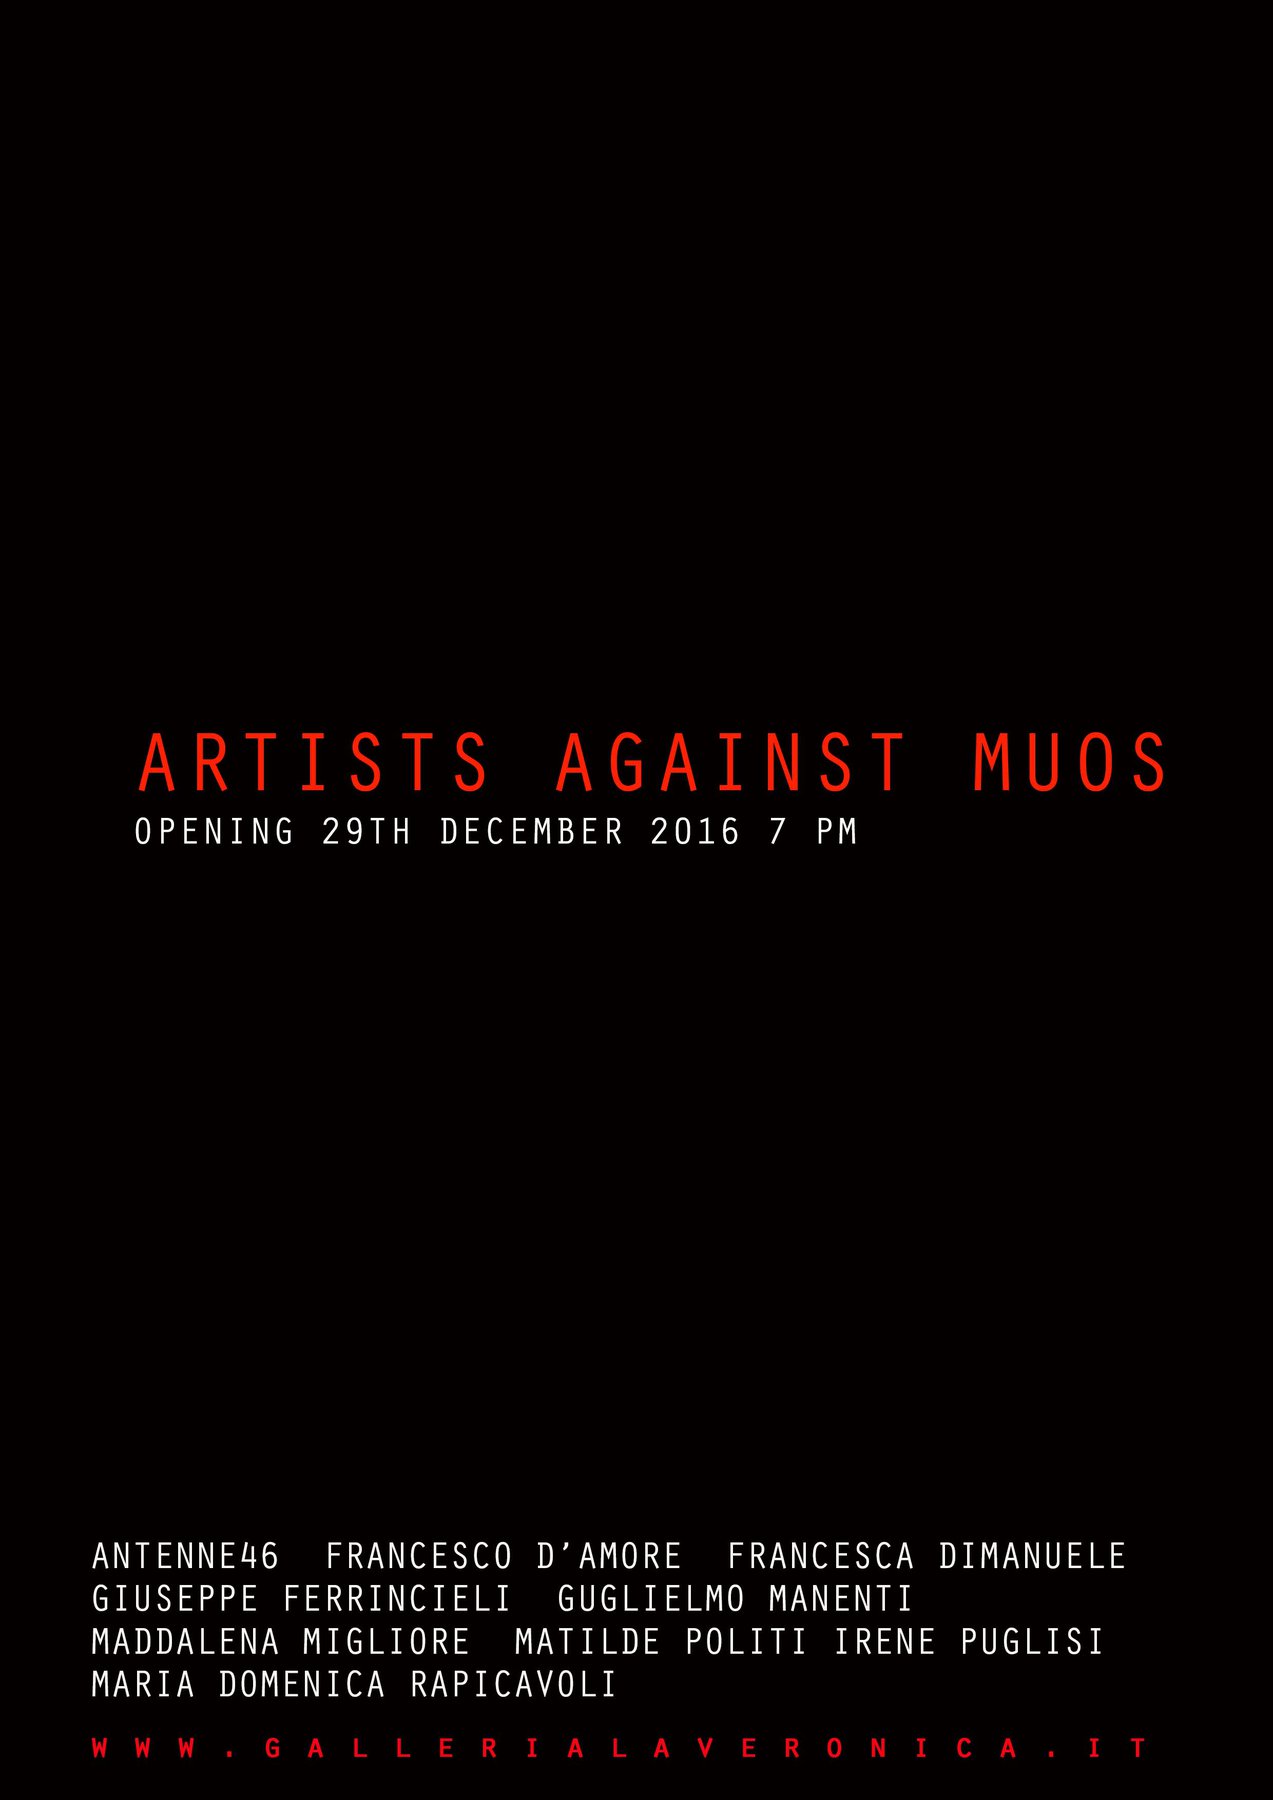 Artists Against MUOS